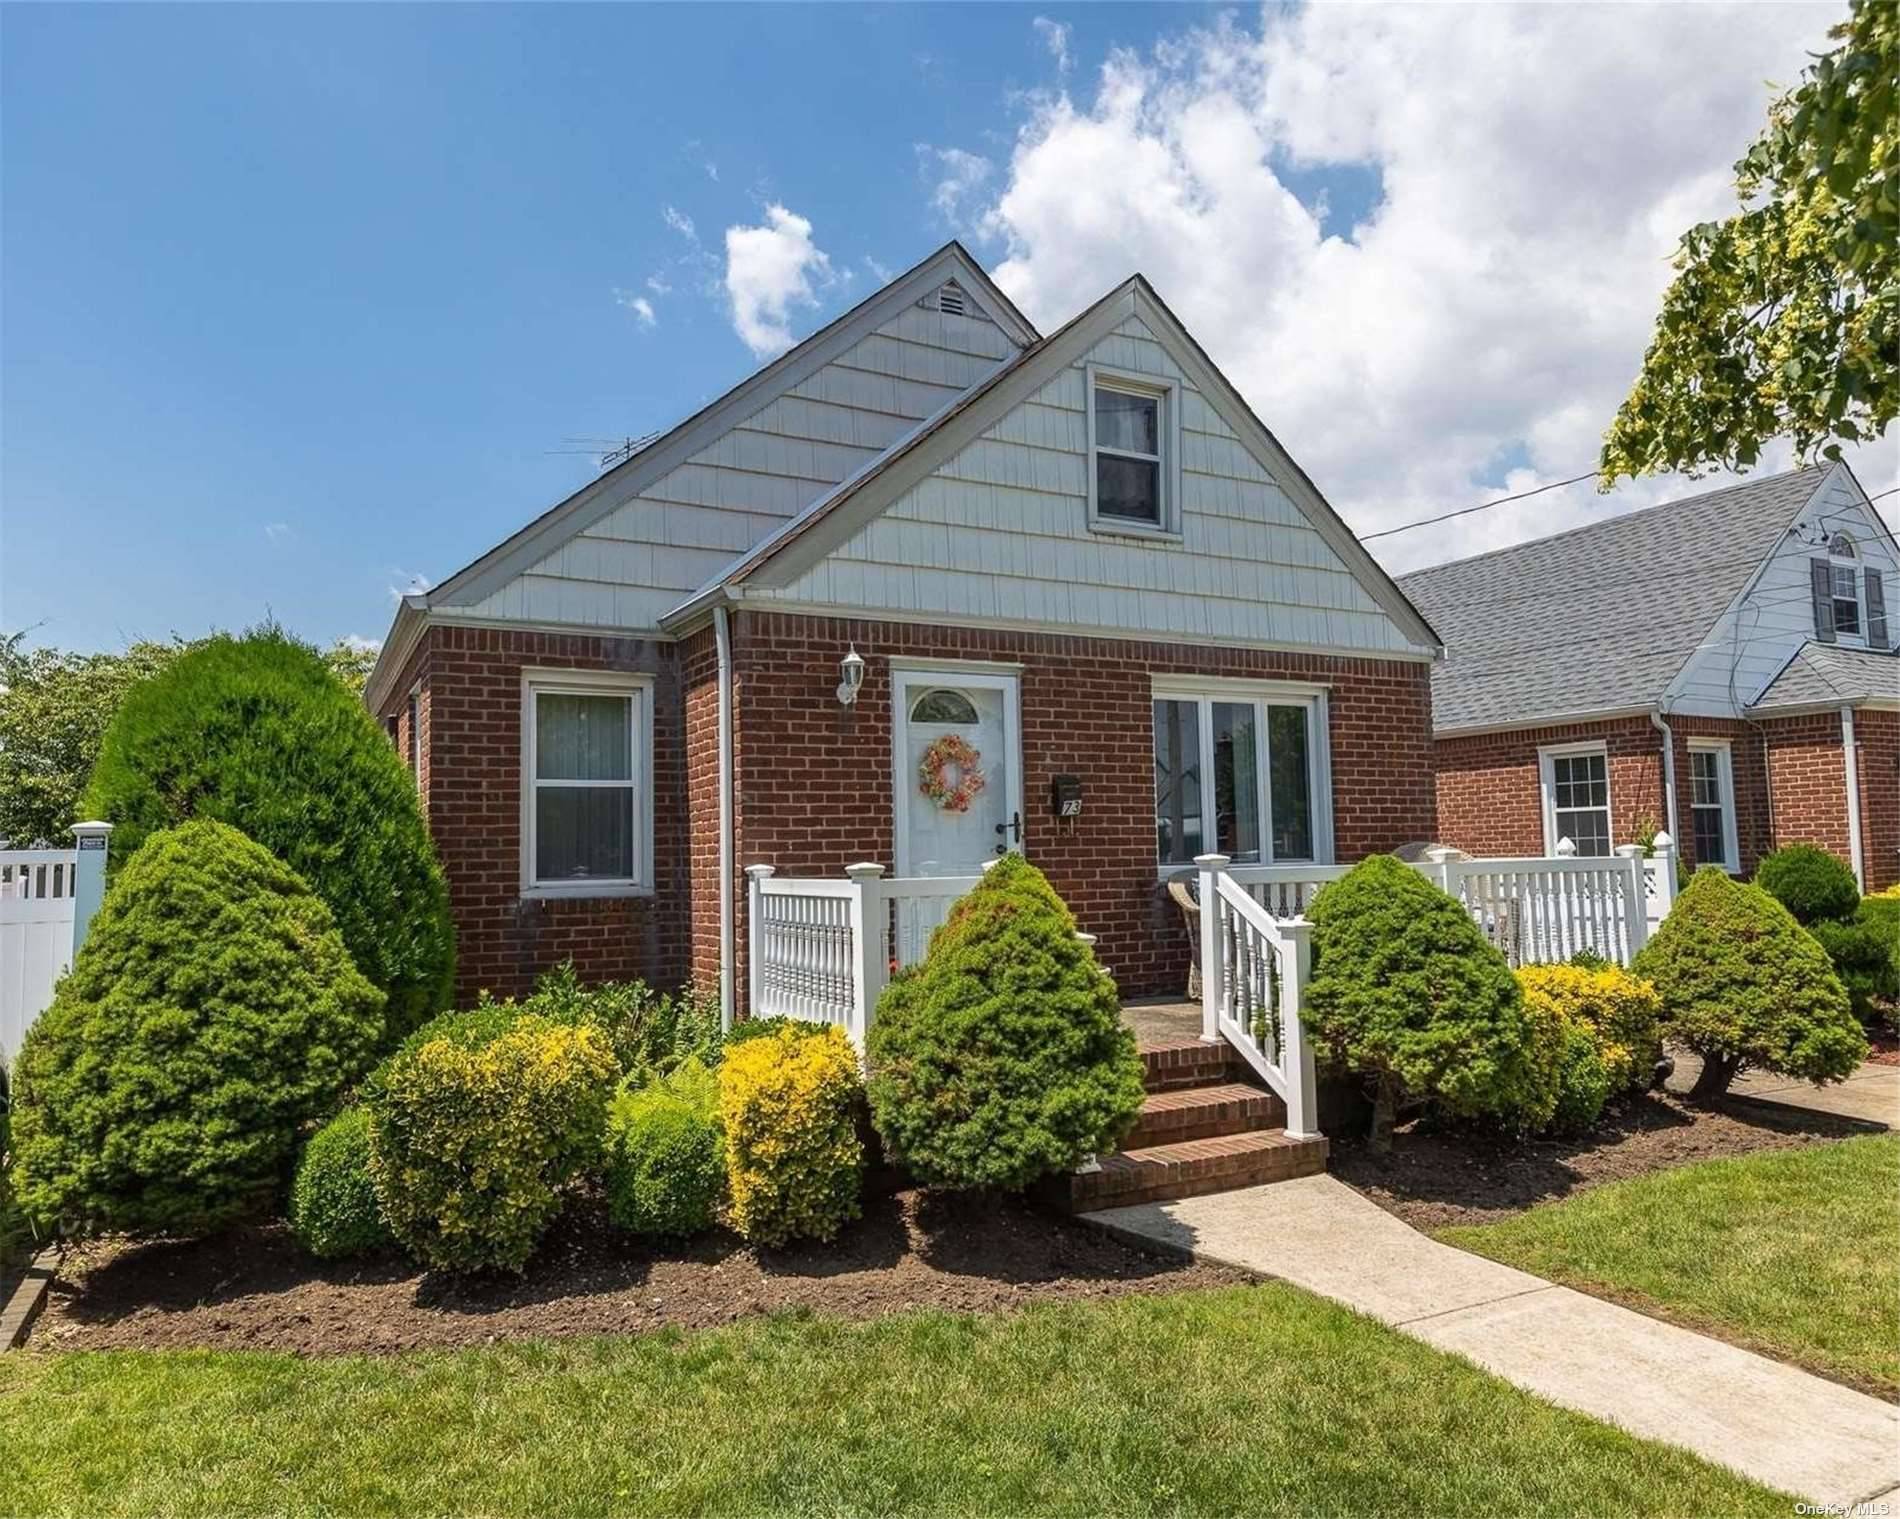 A charming front porch welcomes you into this well maintained Expanded Cape home.